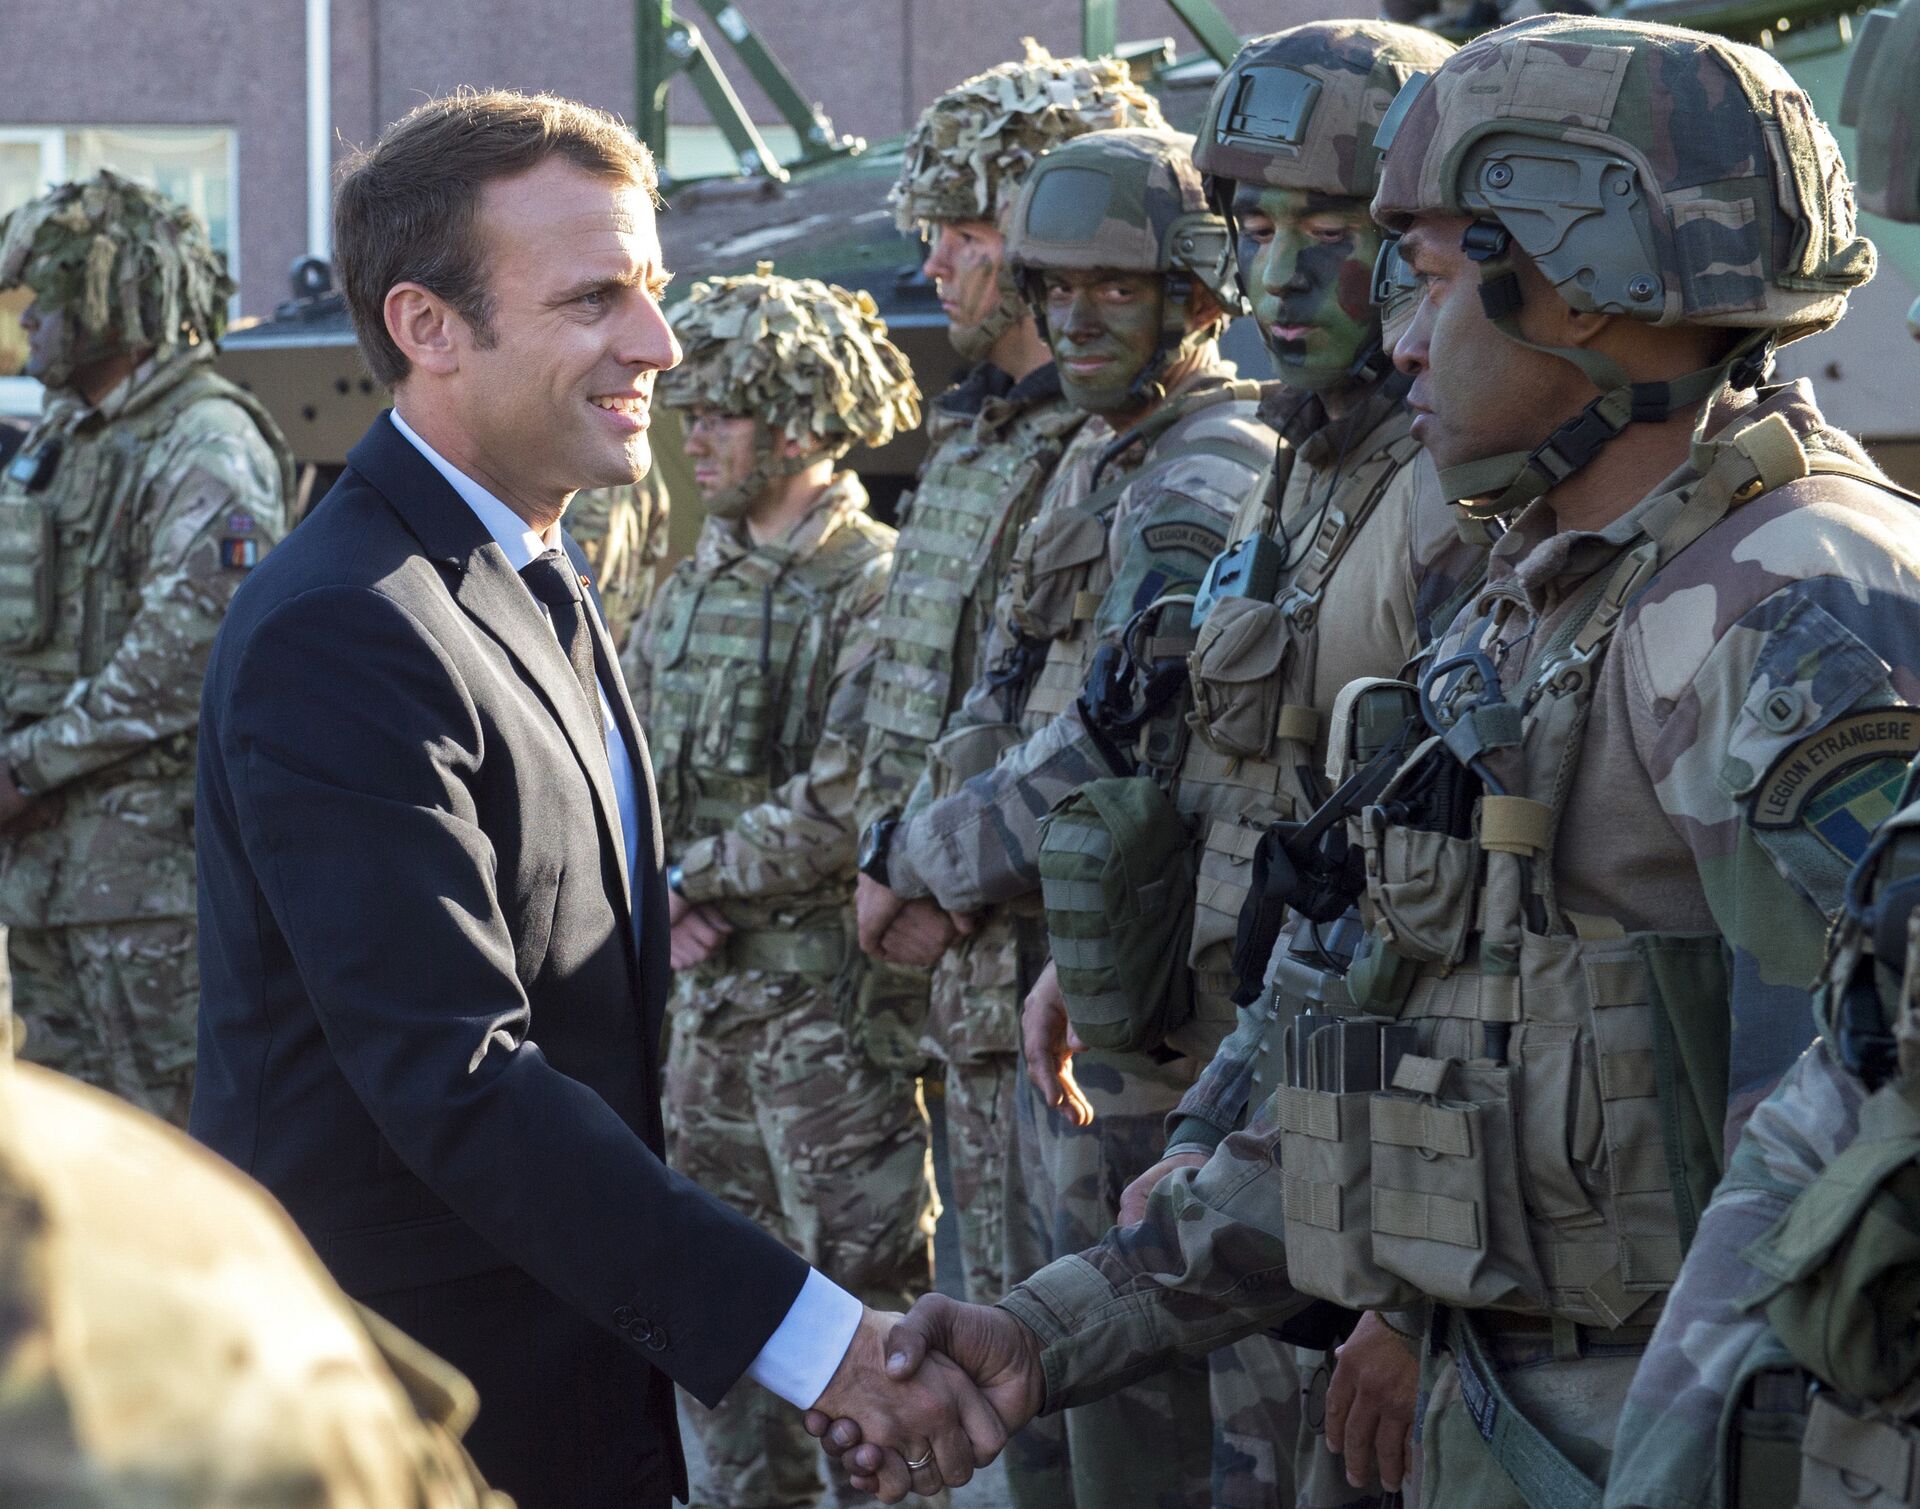 FILE - In this Friday, Sept. 29, 2017 file photo, France's President Emmanuel Macron, left, shakes hands with French soldiers of the NATO Battle Group at the Tapa military base, about 90 kilometers (56 miles) west of Tallinn, Estonia - Sputnik International, 1920, 28.09.2021